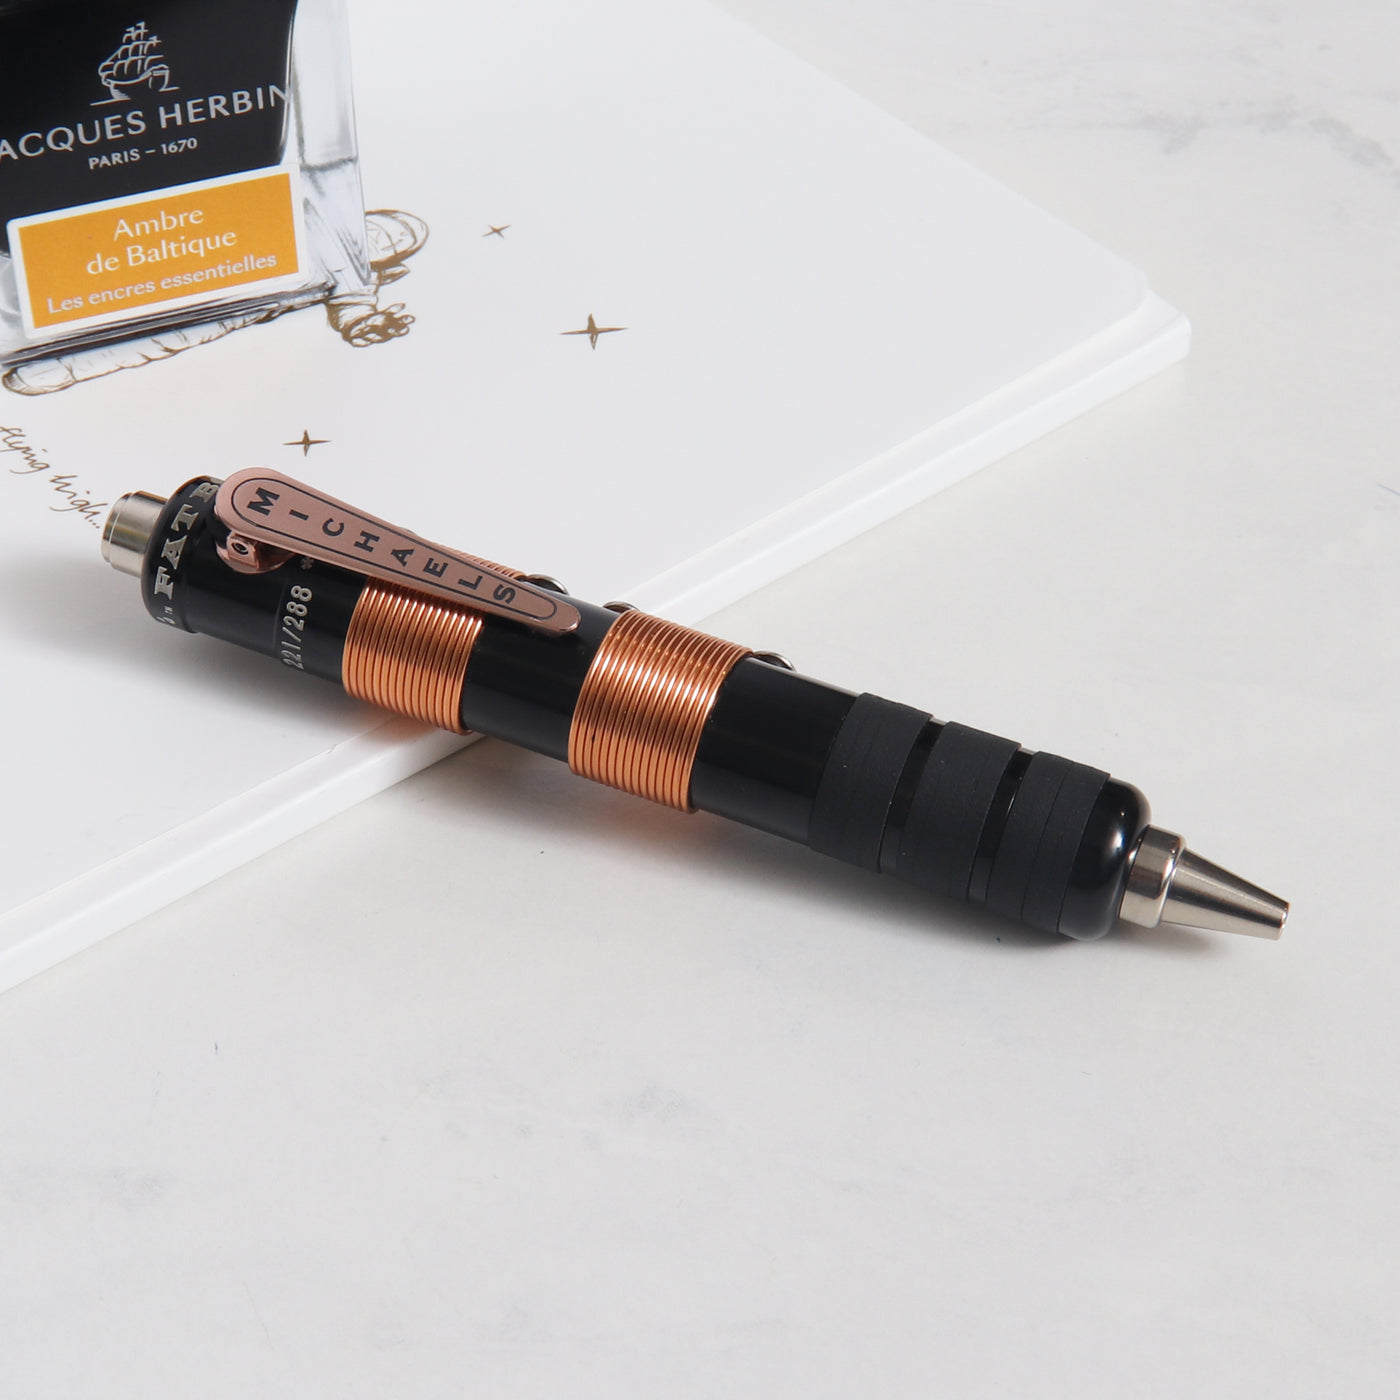 Michael's Fatboy Limited Edition High Voltage Copper & Black TeslaCoil Ballpoint Pen - Preowned Closed